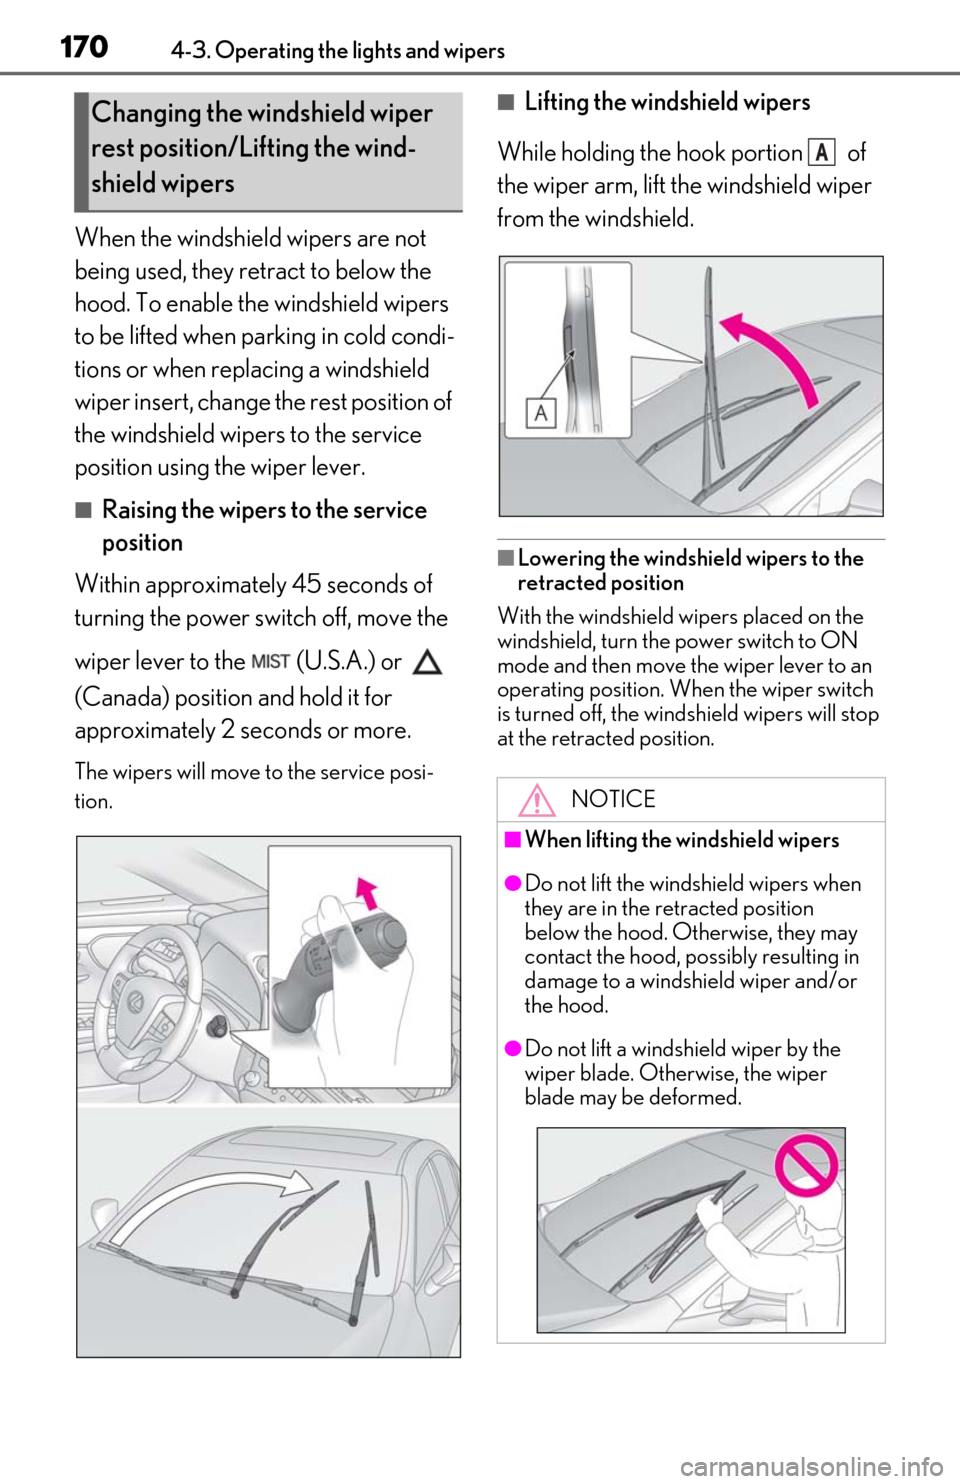 Lexus ES300h 2020  Owners Manual (OM06196U) 1704-3. Operating the lights and wipers
When the windshield wipers are not 
being used, they retract to below the 
hood. To enable the windshield wipers 
to be lifted when parking in cold condi-
tions